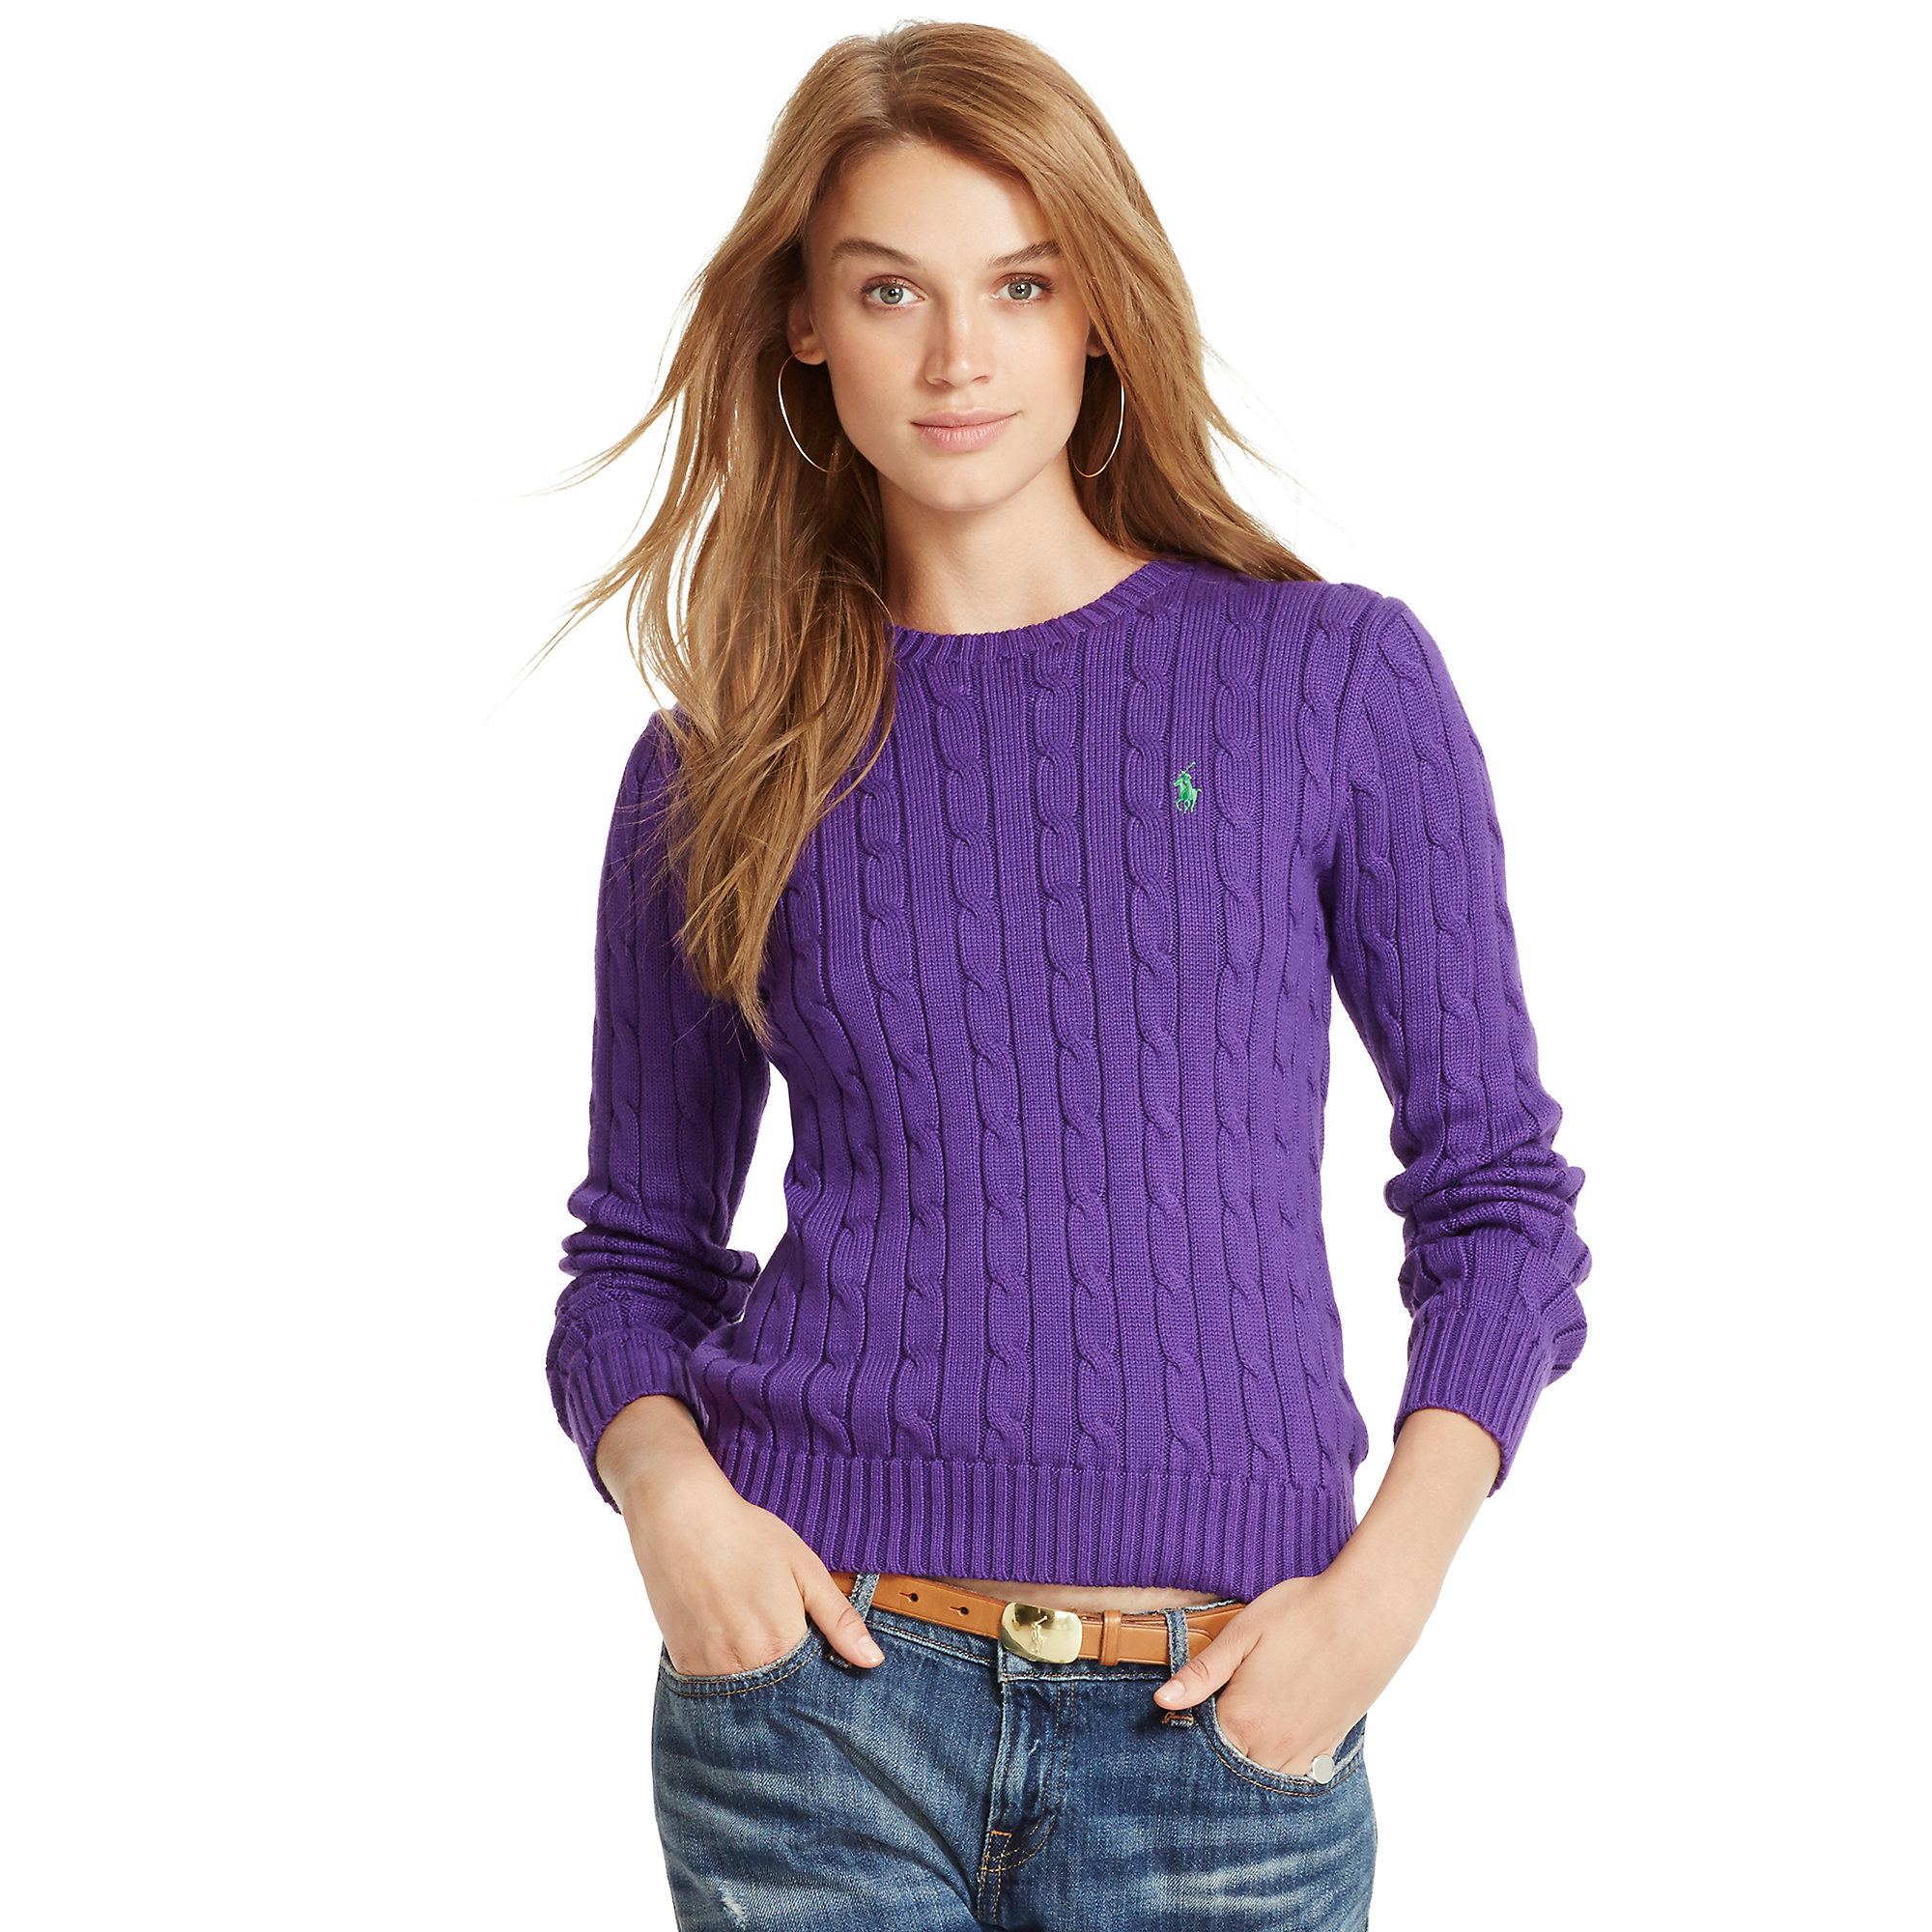 Polo ralph lauren Cabled Crewneck Sweater in Purple (royal lilac)